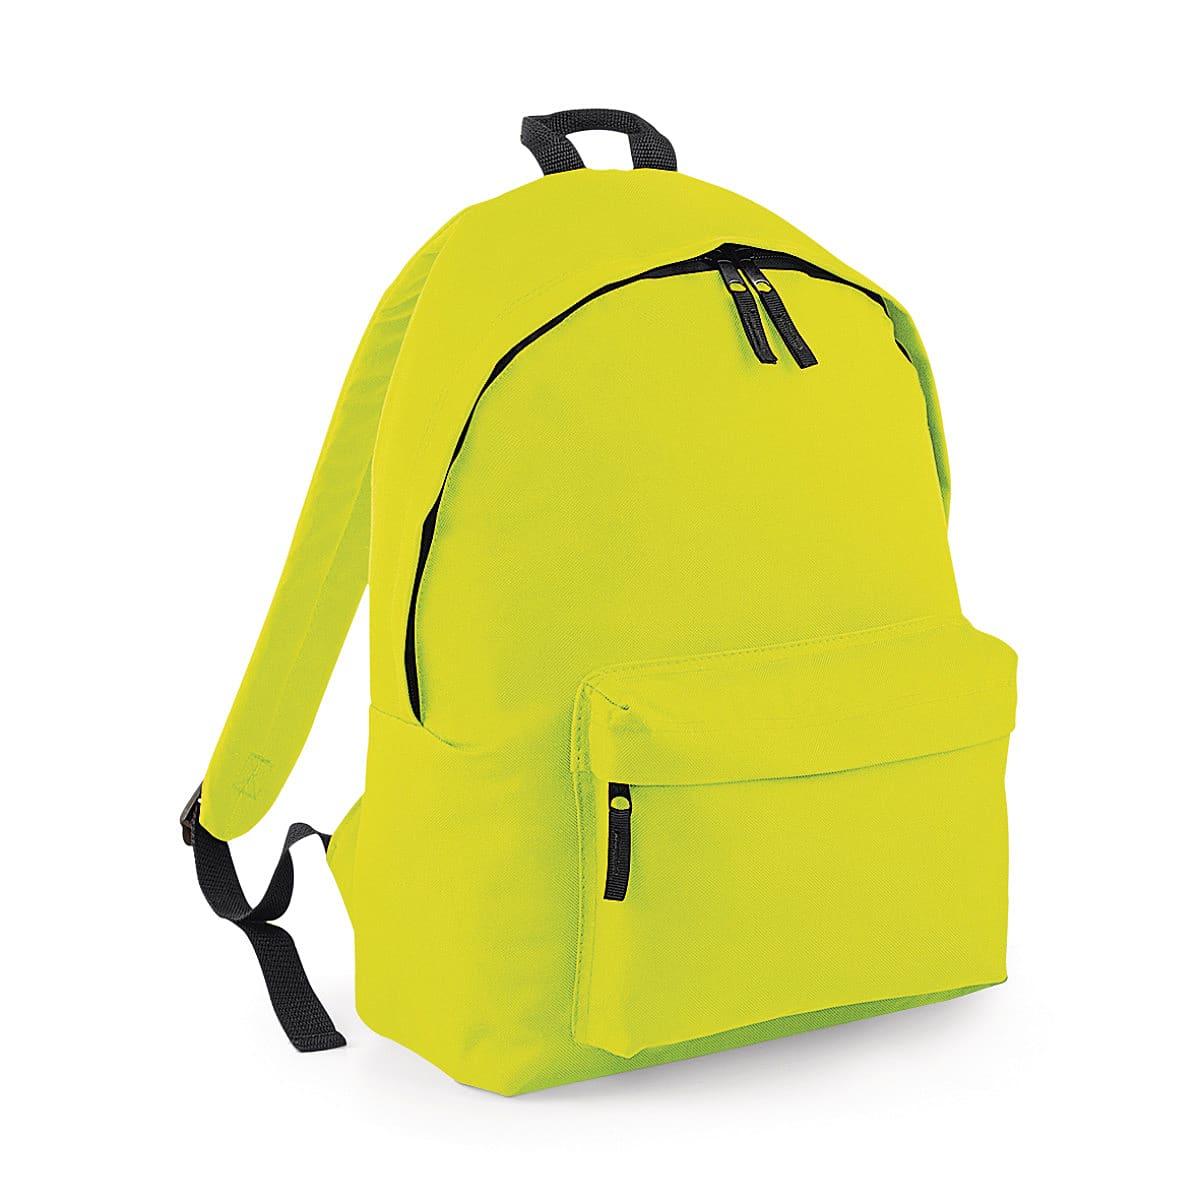 Bagbase Fashion Backpack in Fluorescent Yellow (Product Code: BG125)